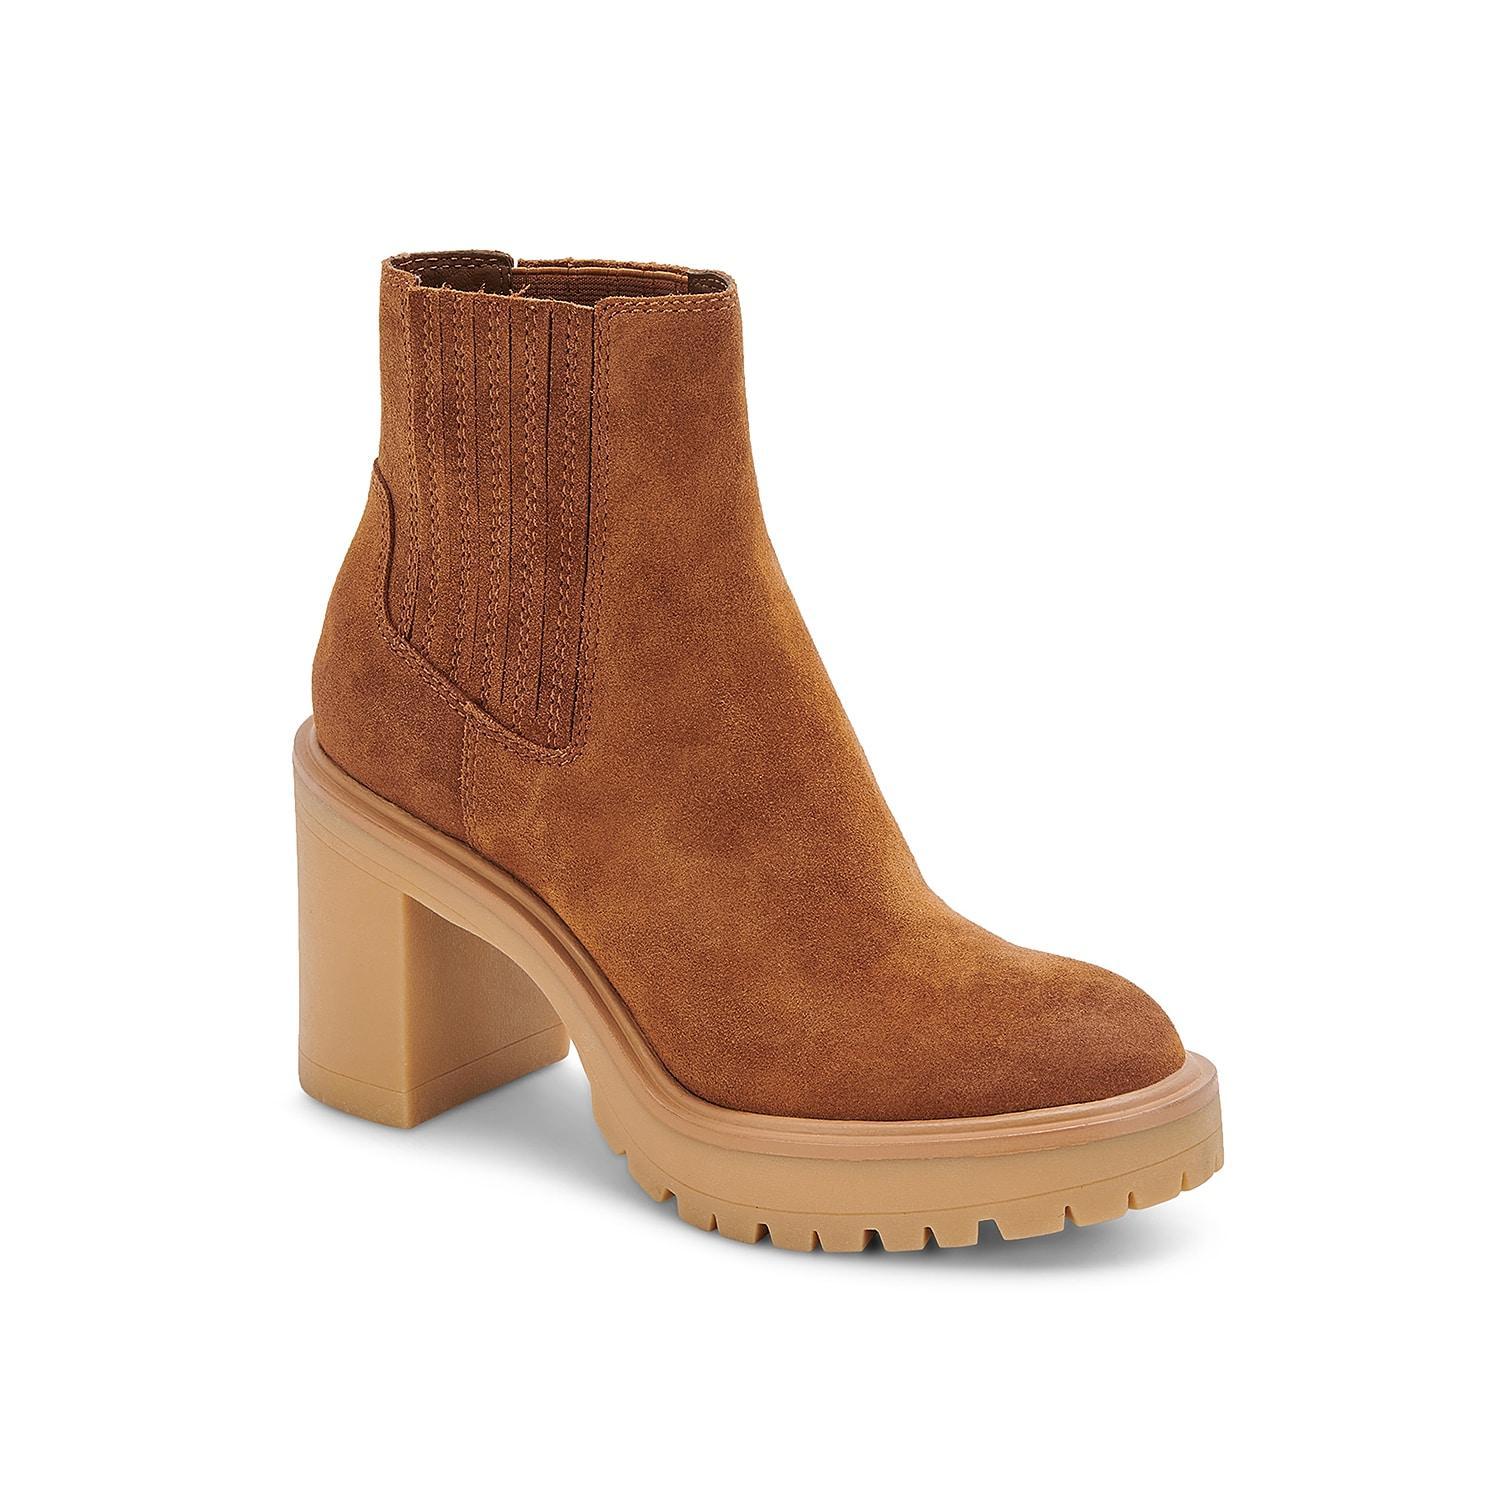 Dolce Vita Caster H2O Water Repellent Suede Lug Sole Platform Chelsea Booties Product Image